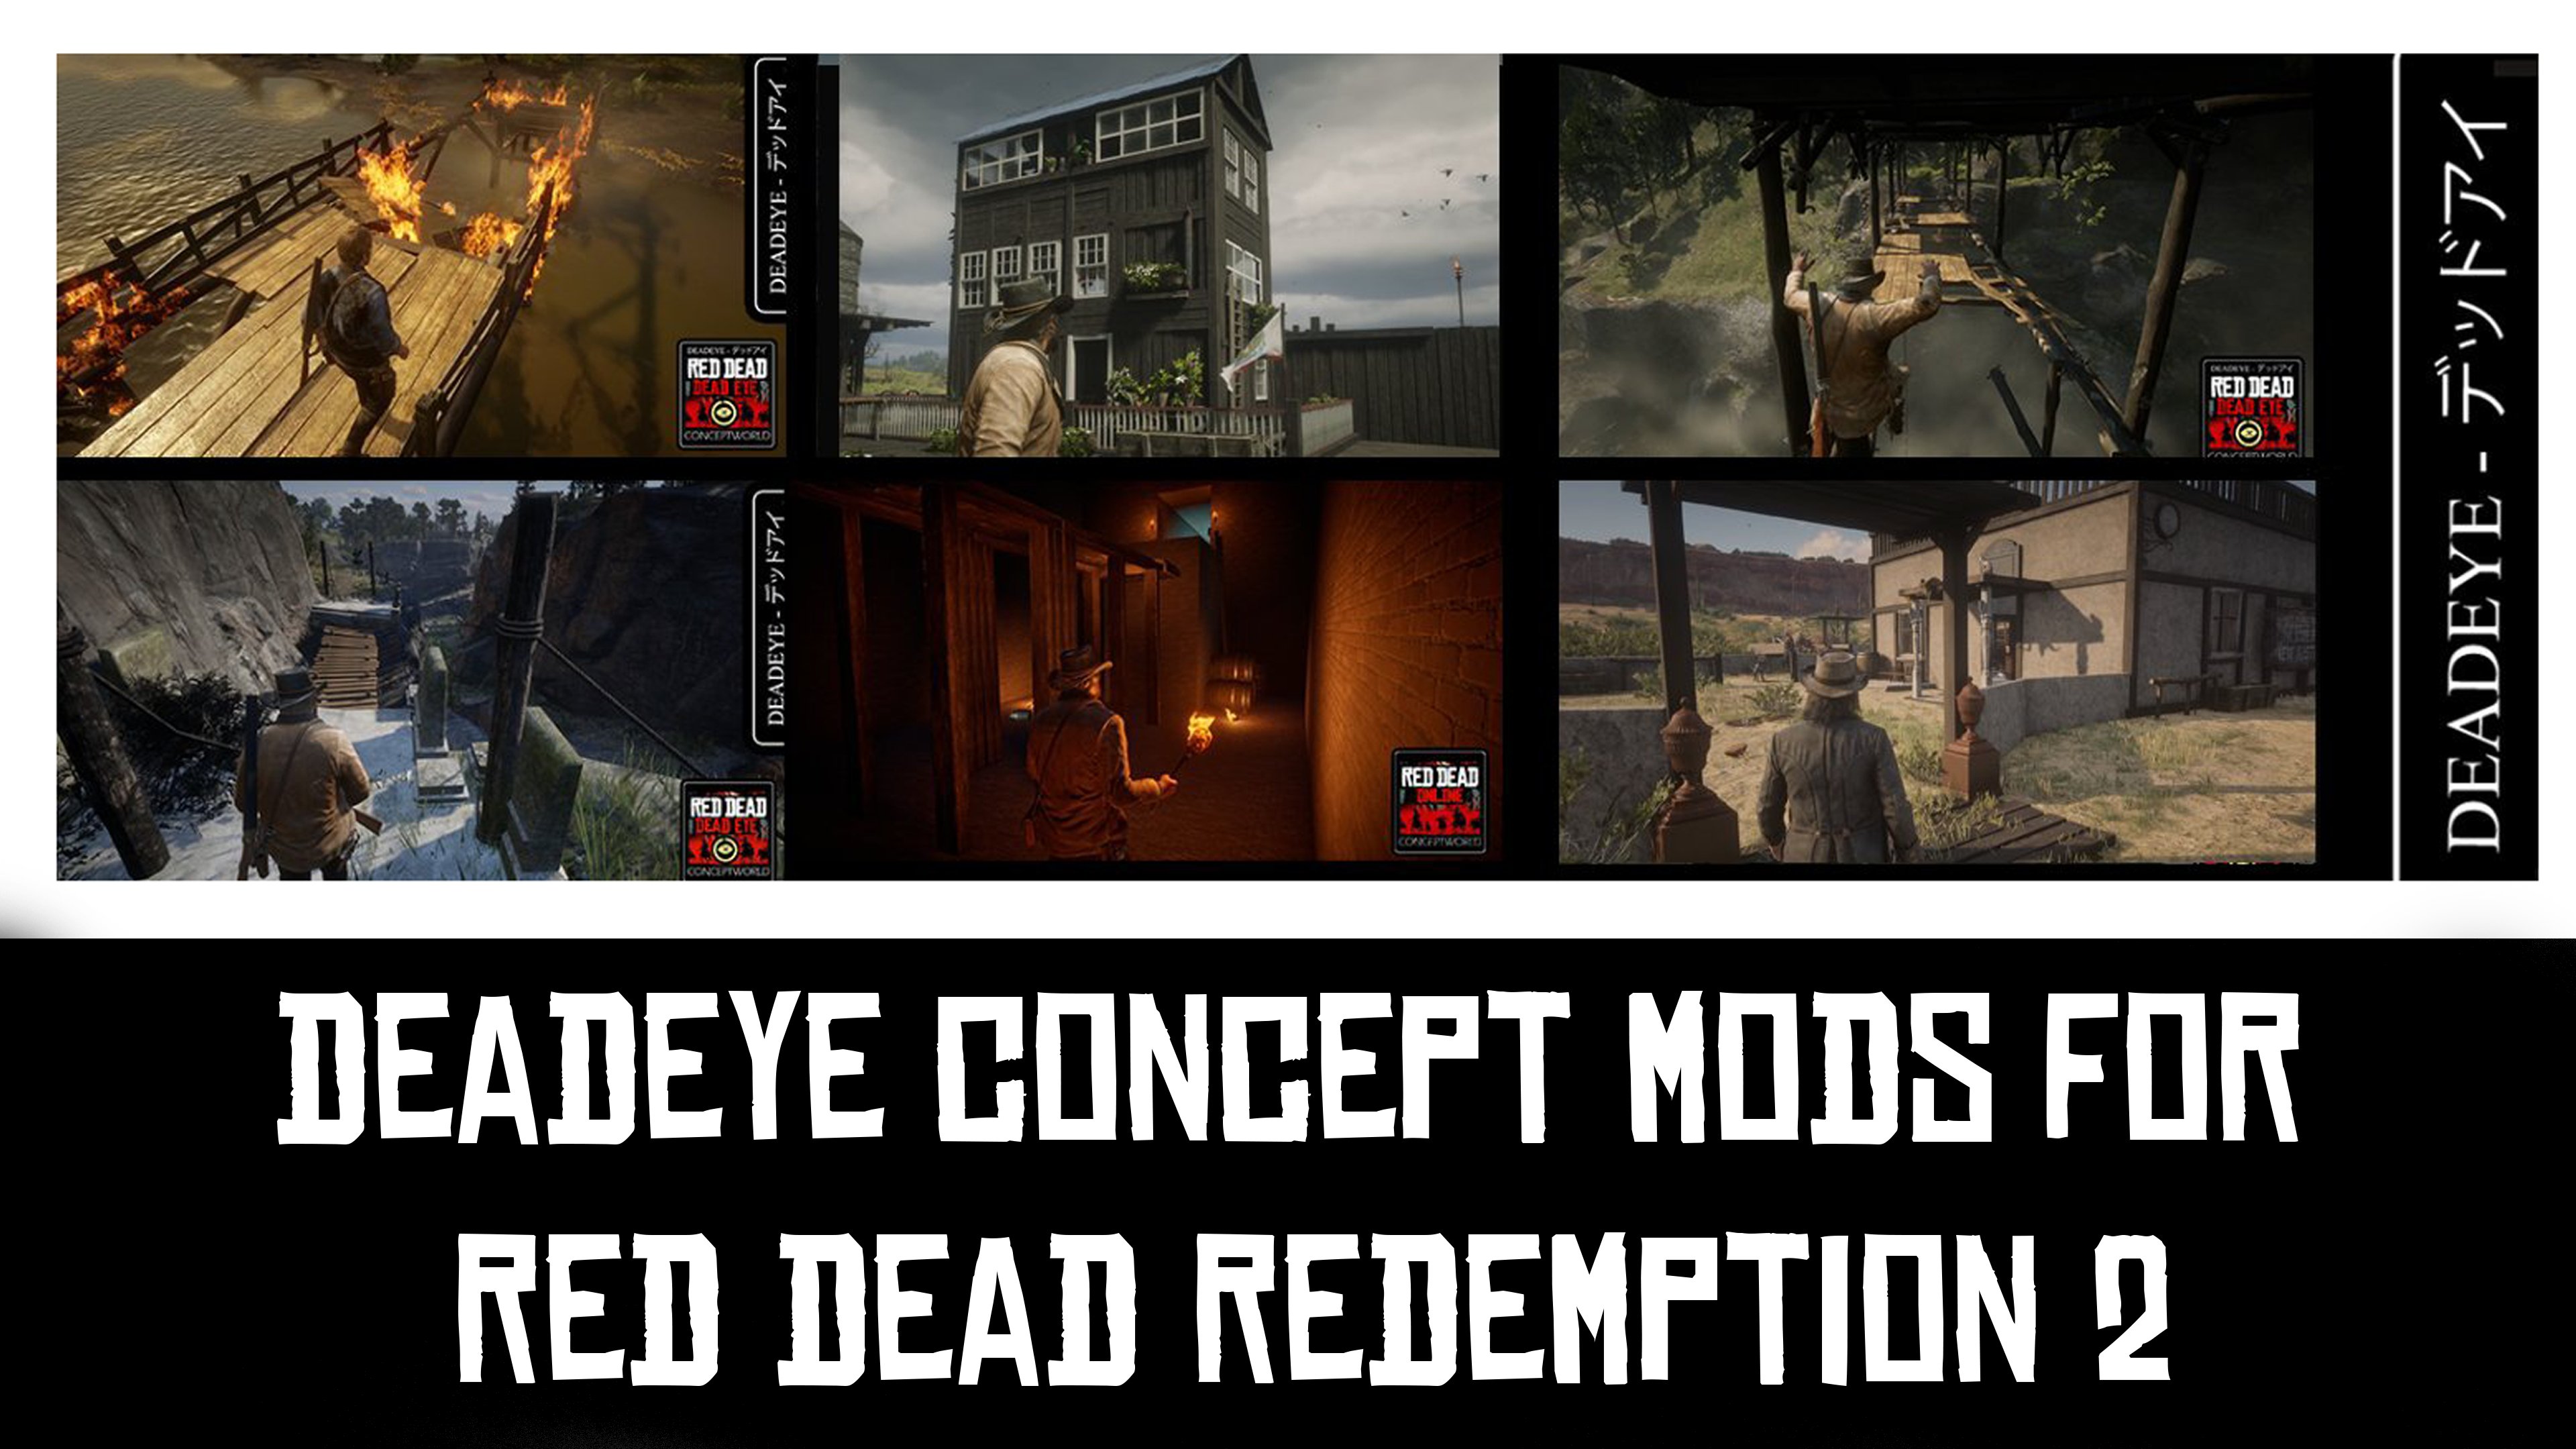 DEADEYE - デッドアイ on X: 𝗠𝗬 𝗥𝗗𝗥𝟮 𝗠𝗢𝗗𝗦 𝗔𝗡𝗗 𝗖𝗢𝗡𝗖𝗘𝗣𝗧𝗦 🐴 In  this thread you can see some of the mods and concepts I have created for  Red Dead Redemption 2. /Alligator